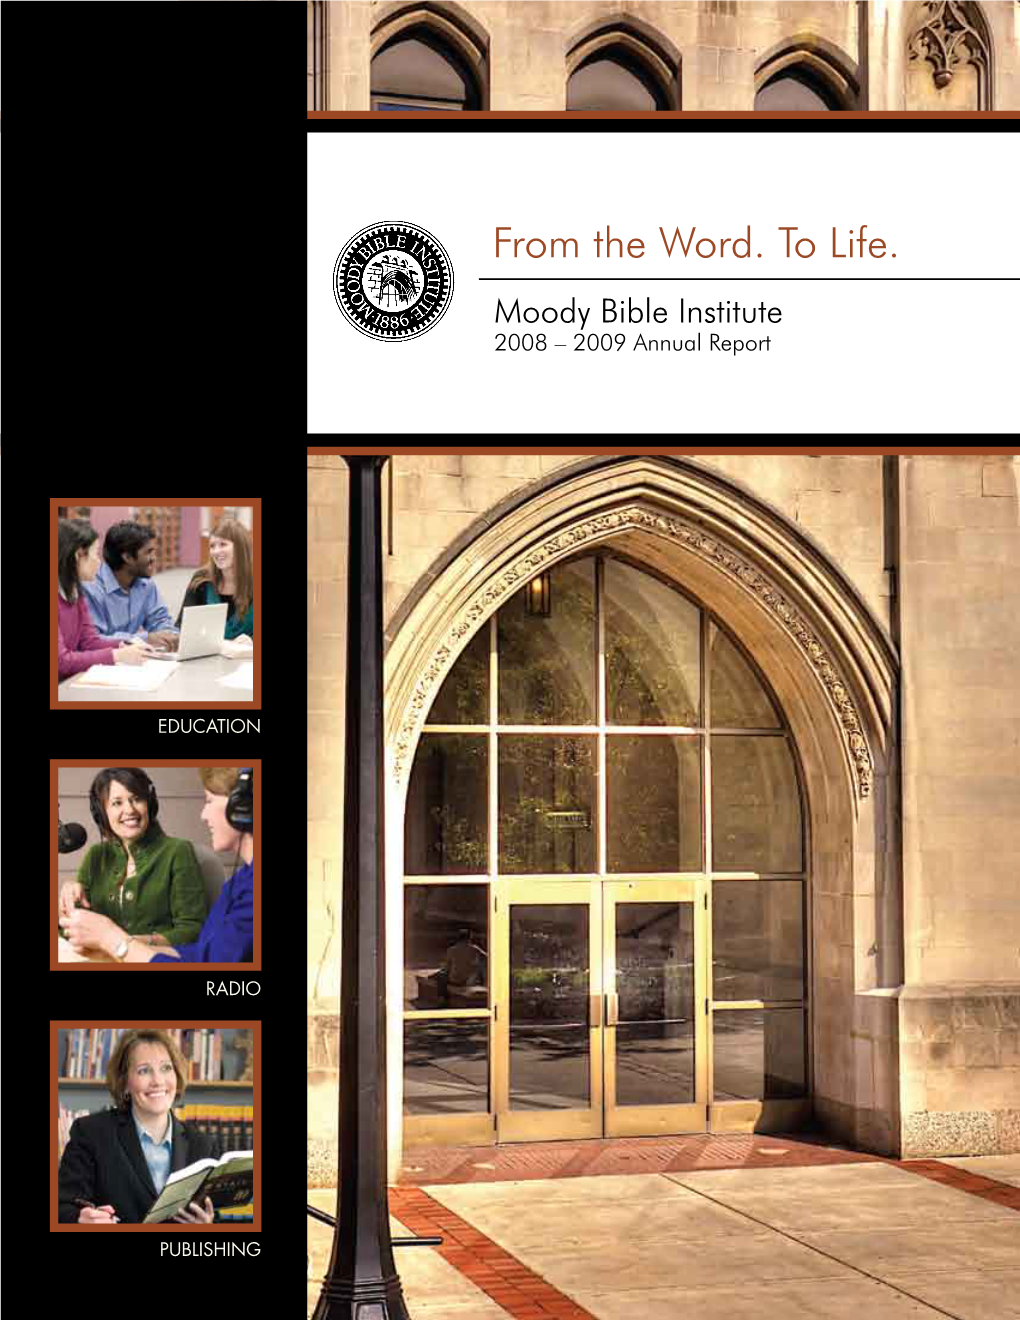 From the Word. to Life. Moody Bible Institute 2008 – 2009 Annual Report